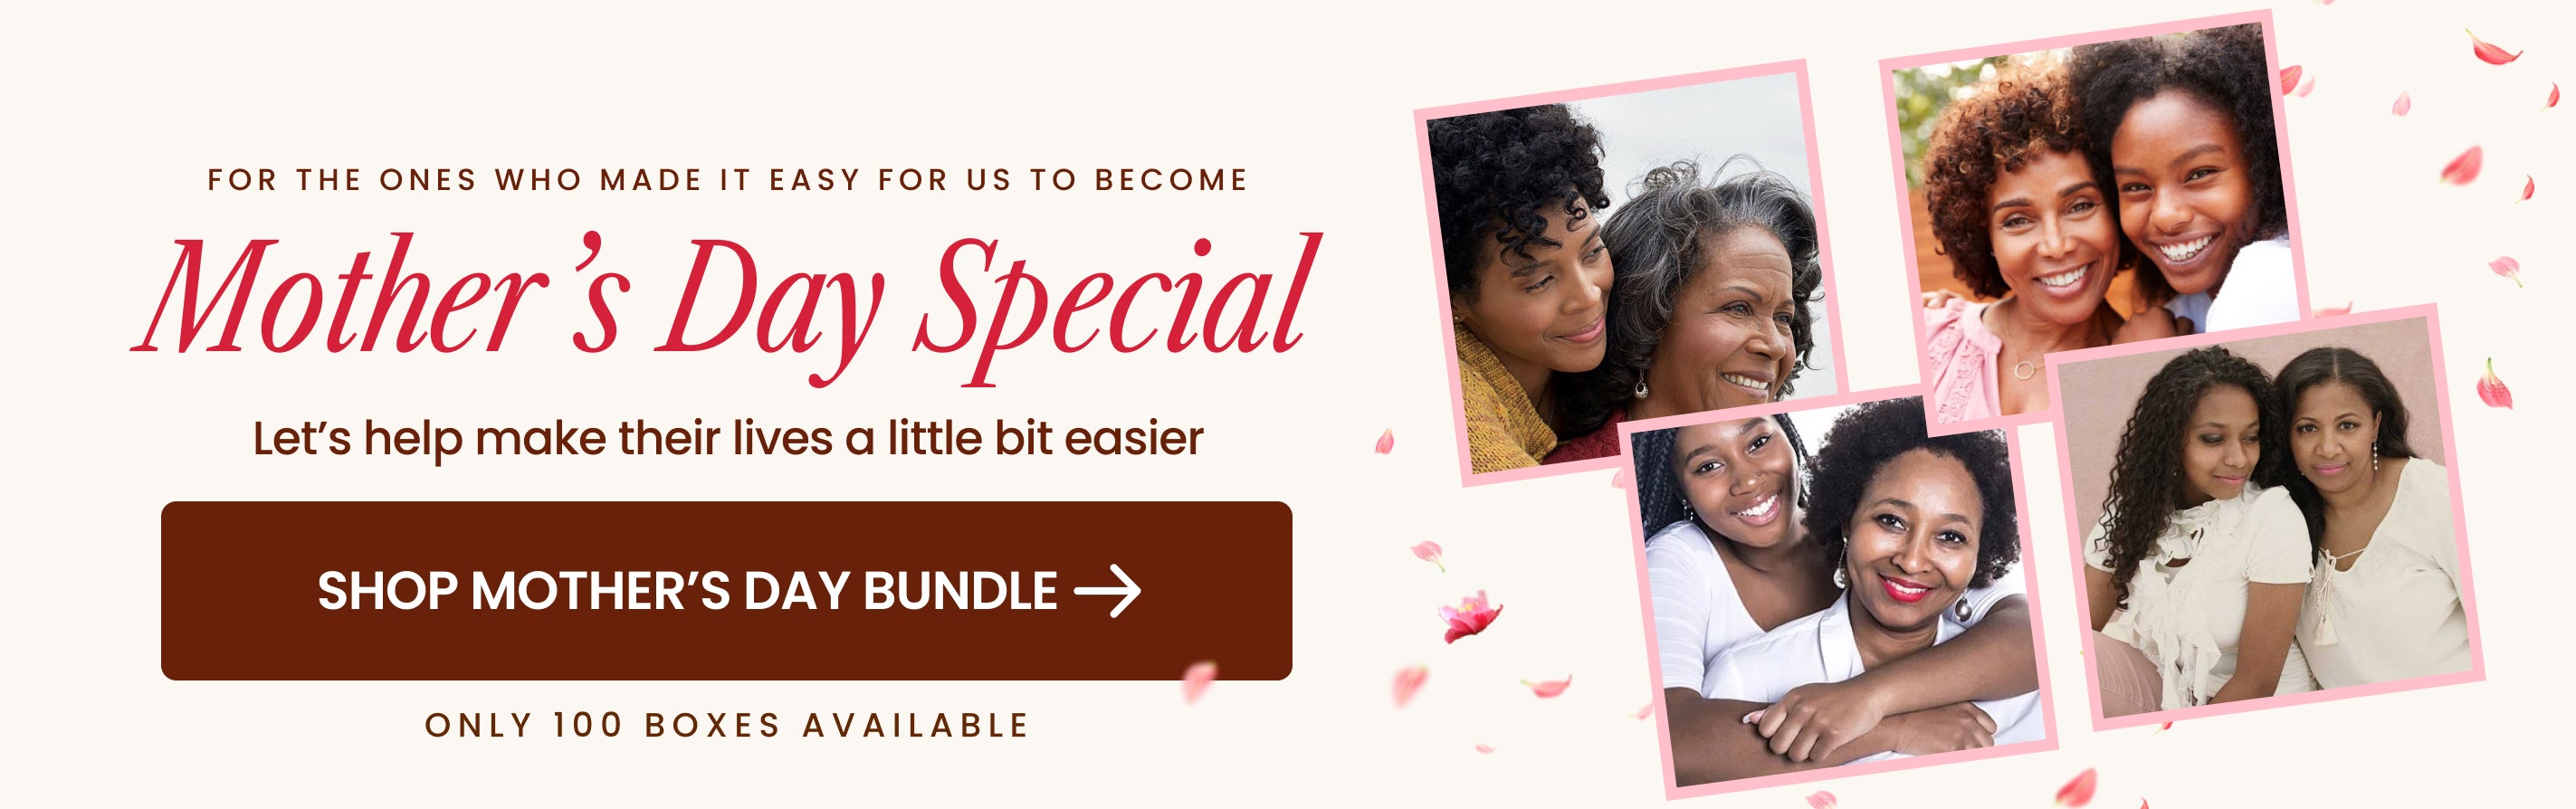 Mother's Day promotional banner with photos of smiling women and a 'Shop Mother's Day Bundle' call-to-action.